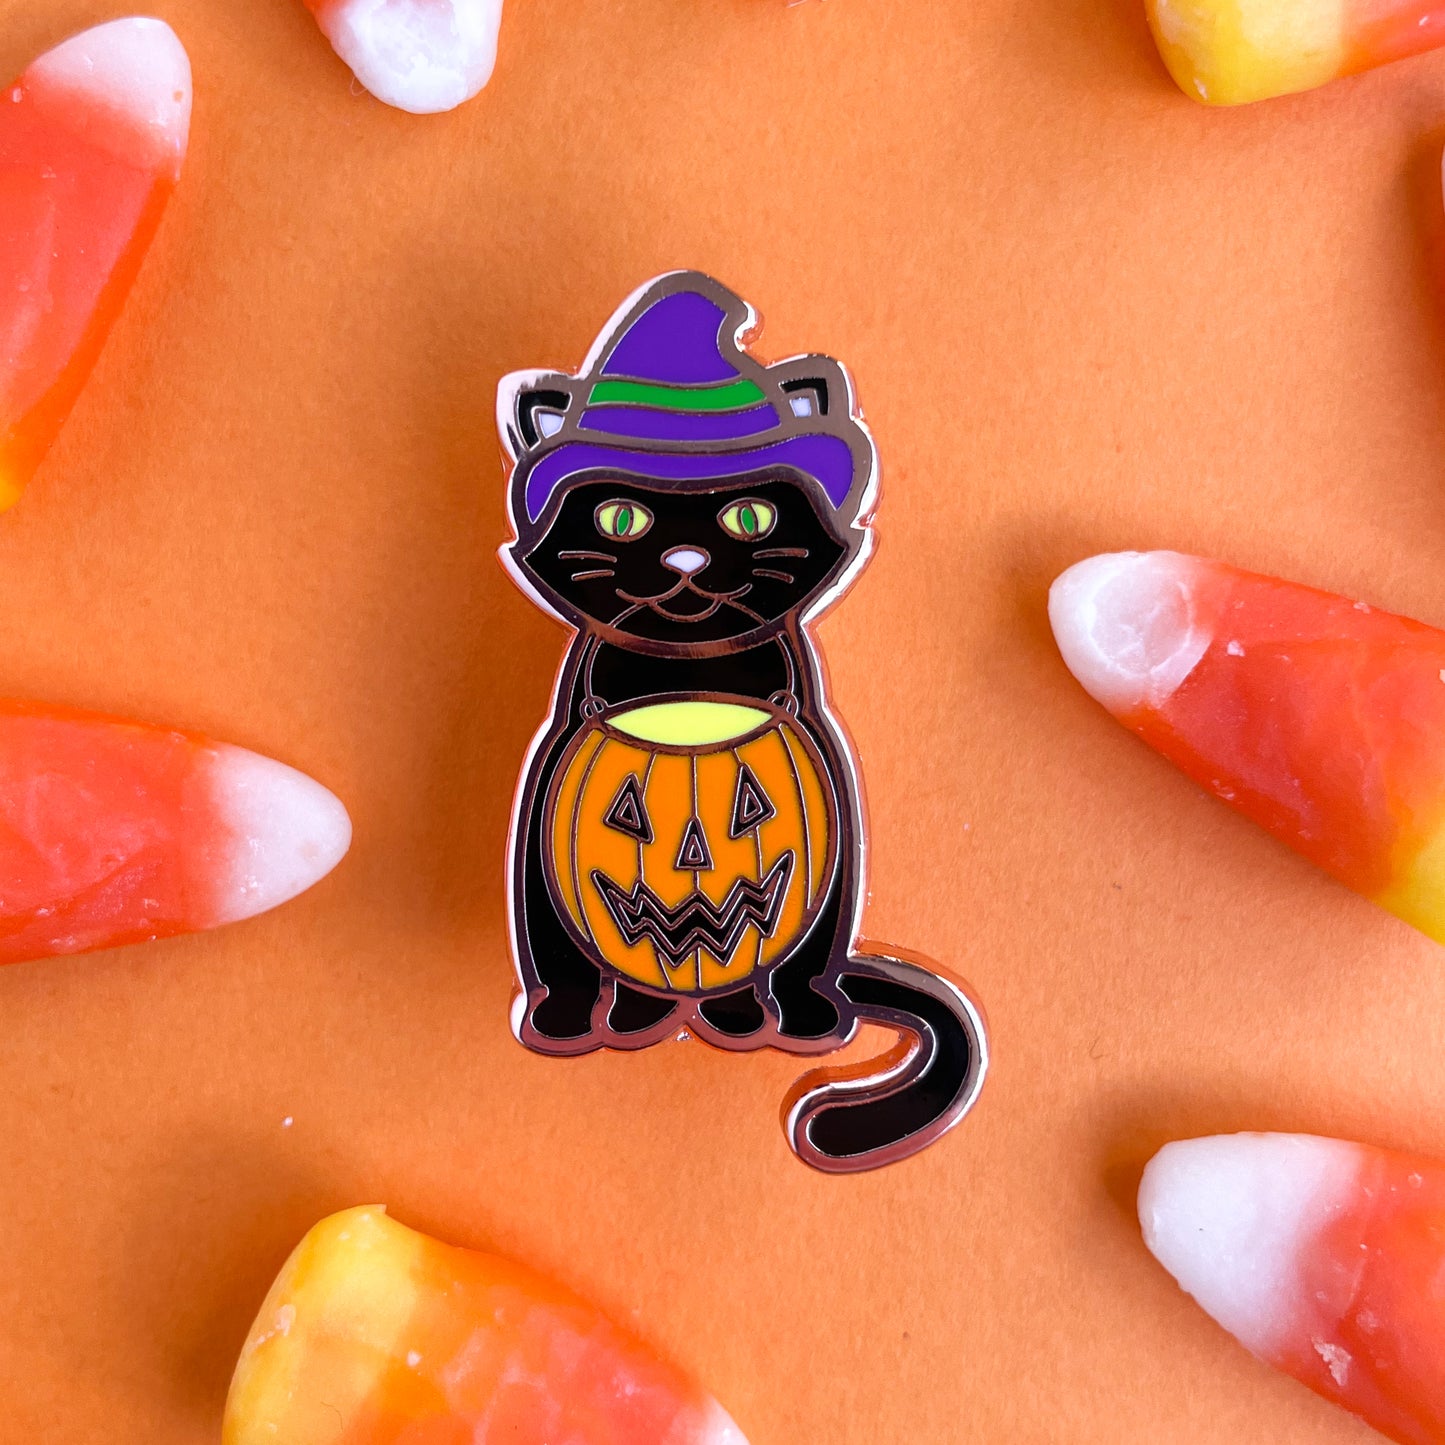 An enamel pin shaped like a black cat wearing purple witch hat holding an orange jack o lantern bucked in its mouth on an orange background with candy corn. 